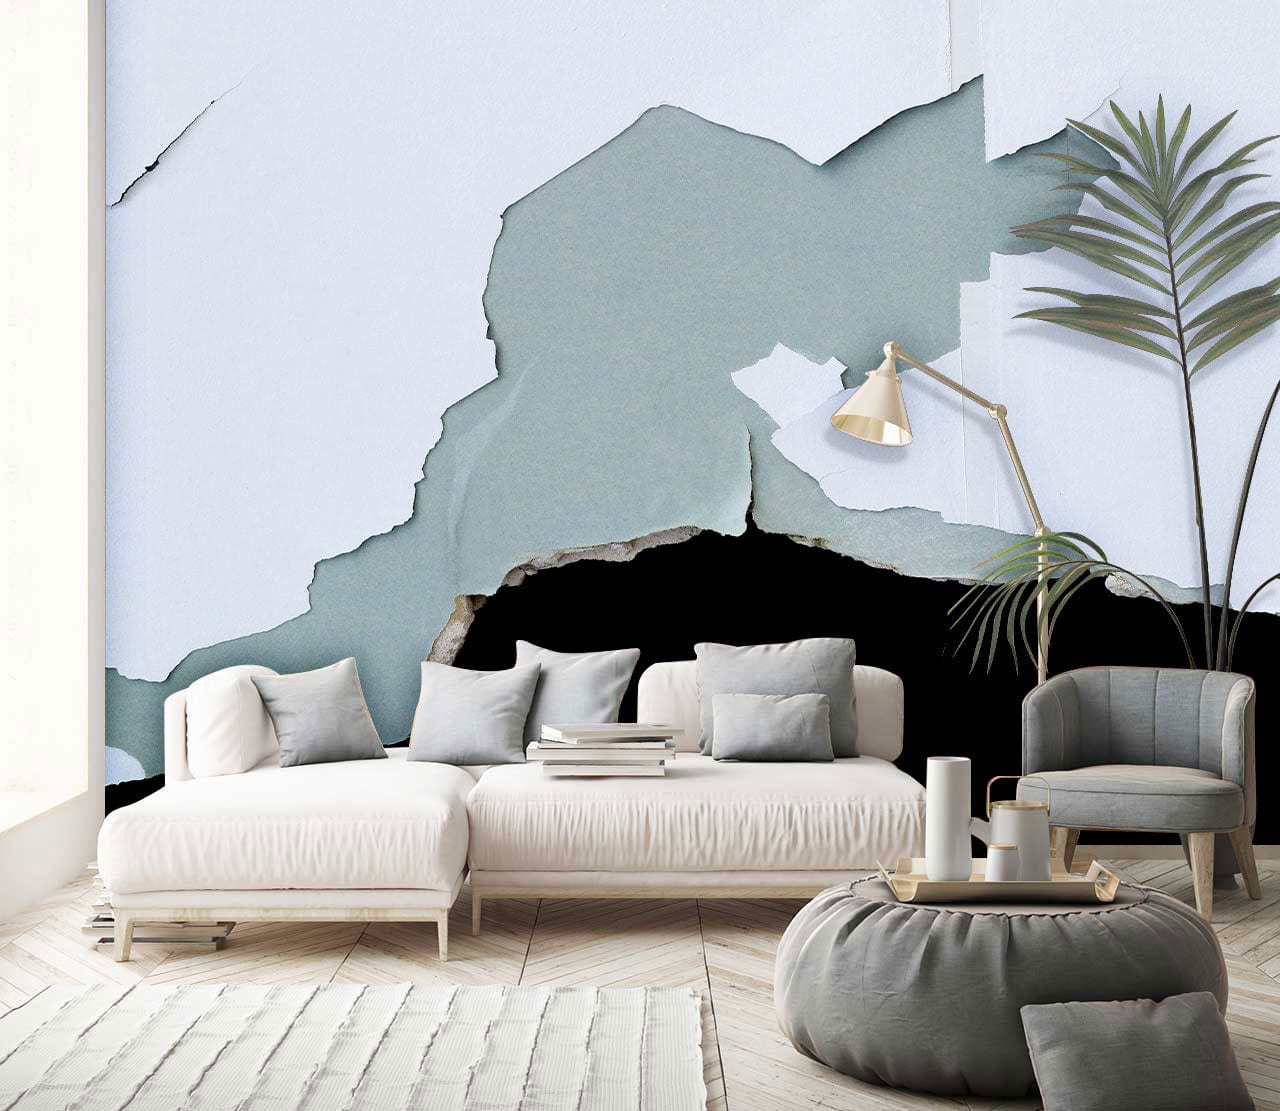 Buckled Wall Skin Wallpaper Mural for the Decoration of the Living Room